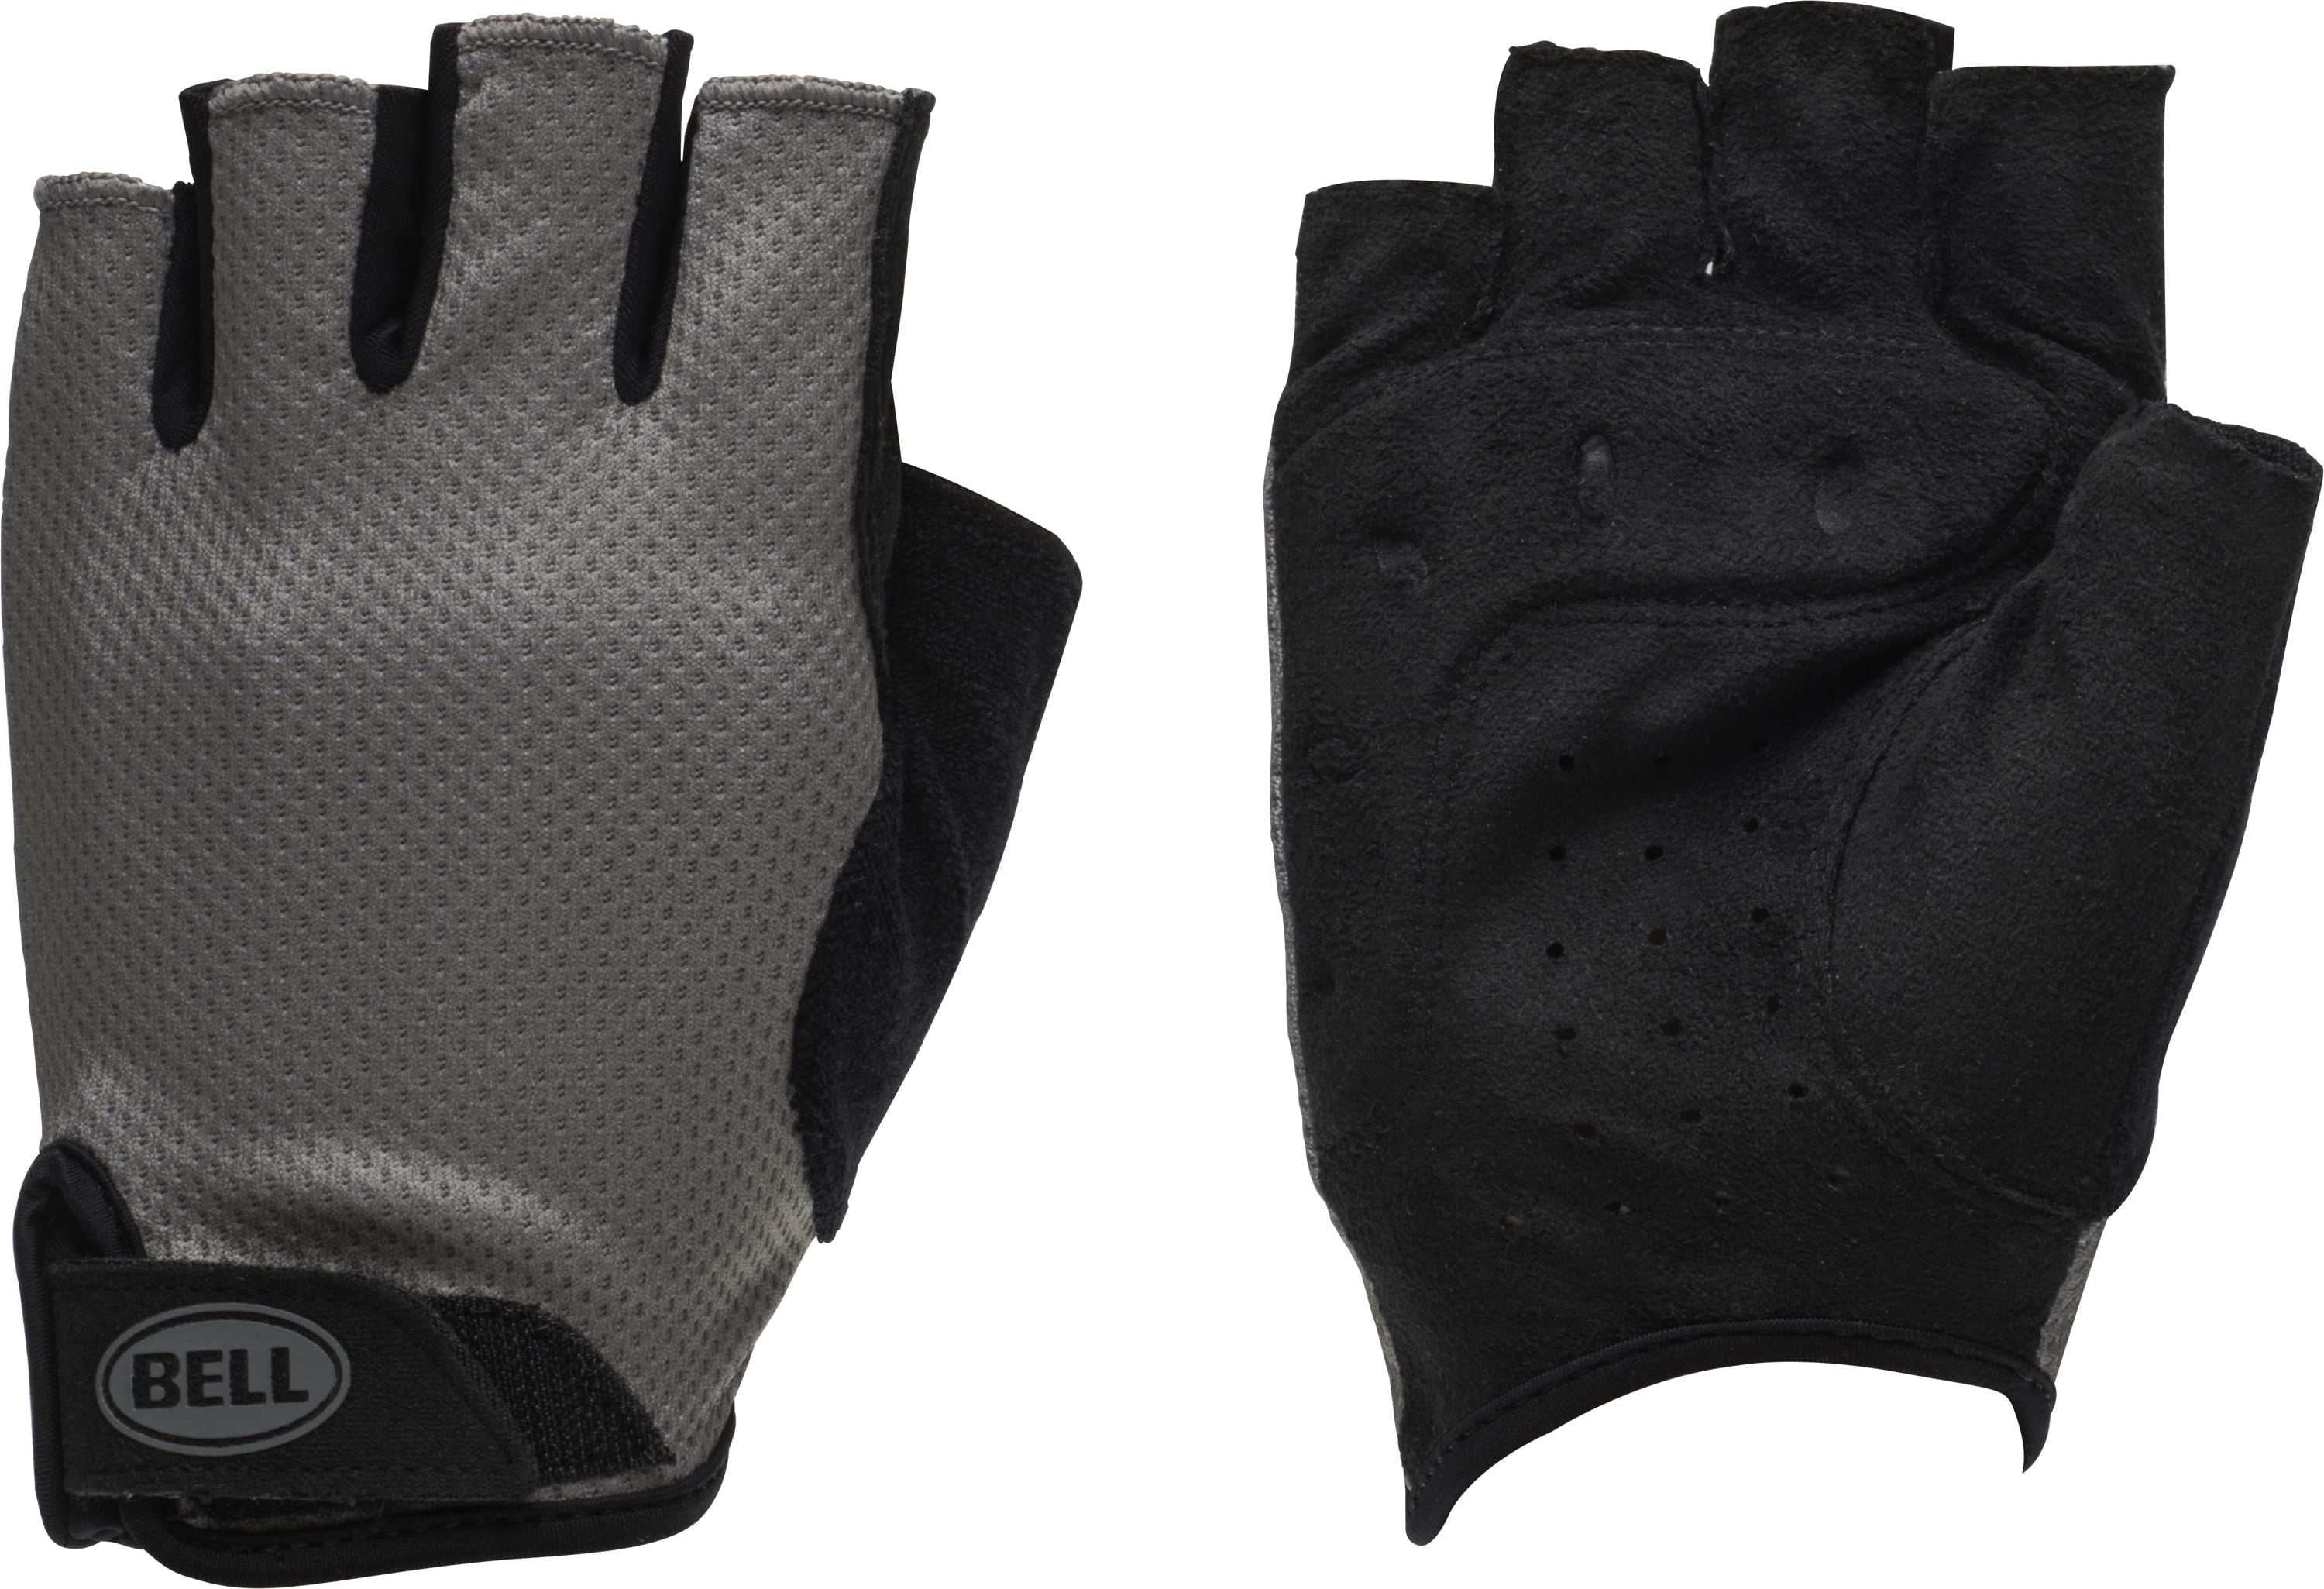 Leather Cycling Gloves Cut Finger Cycle Mitts Gloves Size S-M,L-XL 